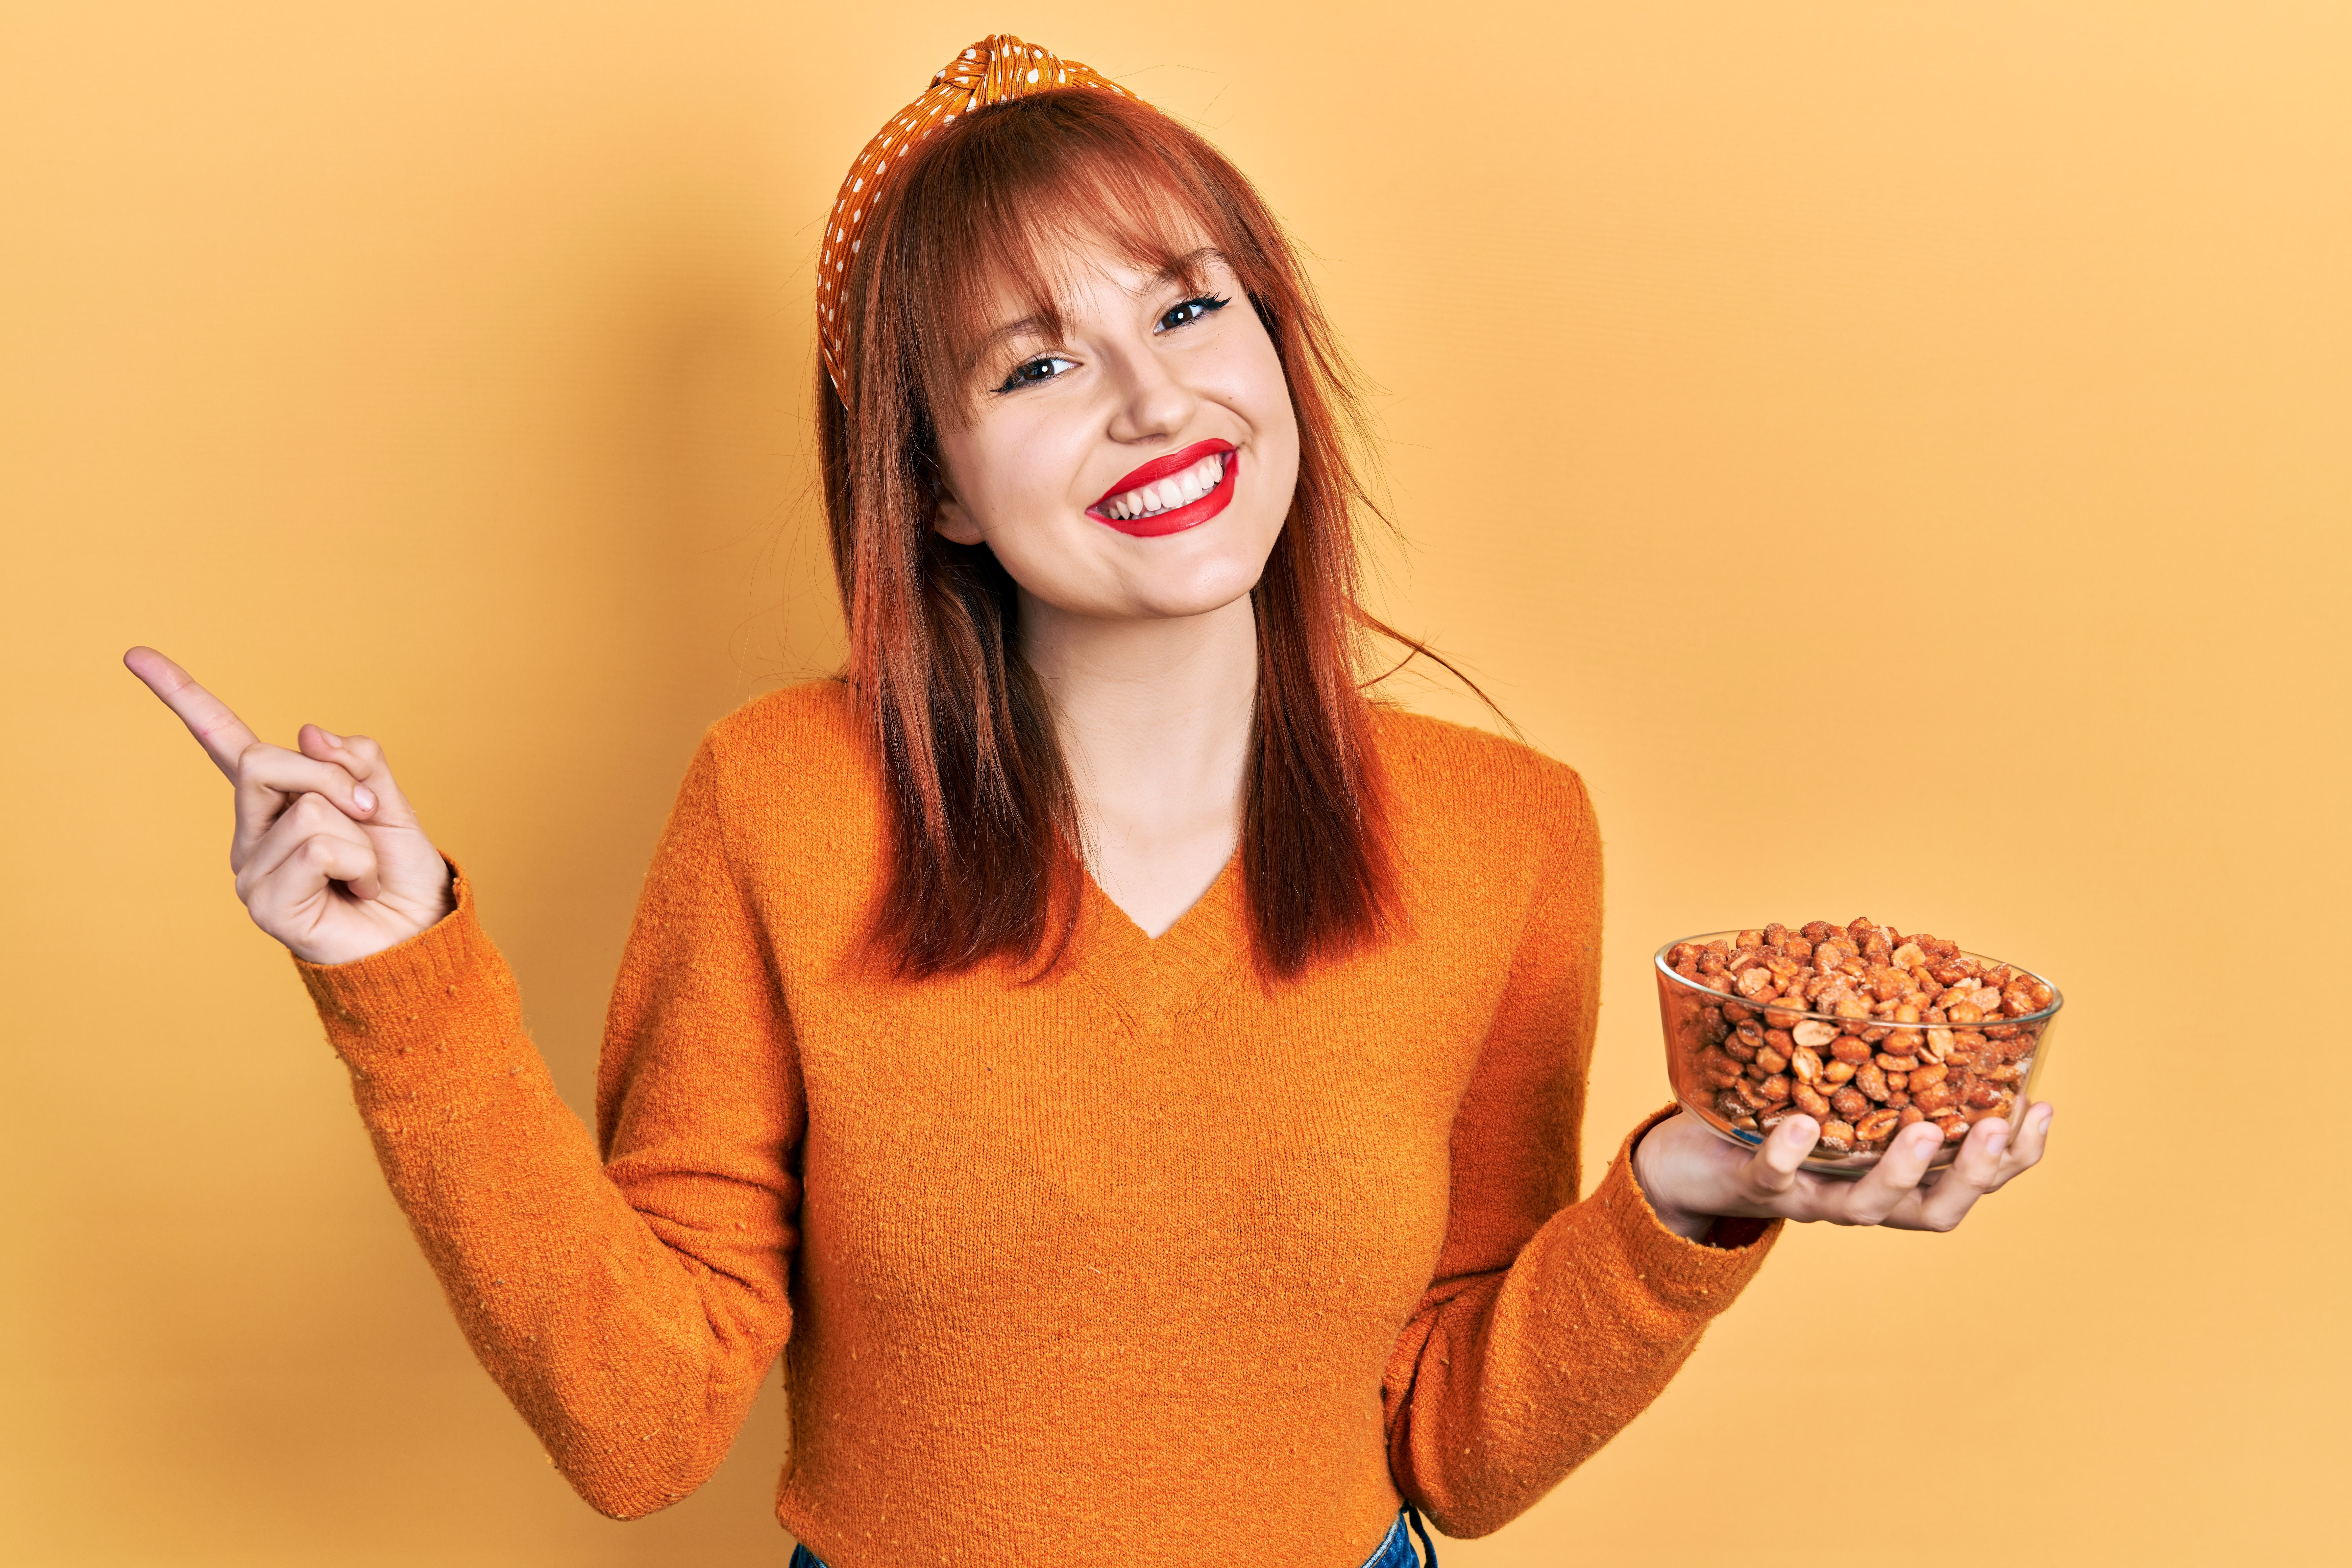 Smiling Woman holding nuts in one hand, pointing with the other.